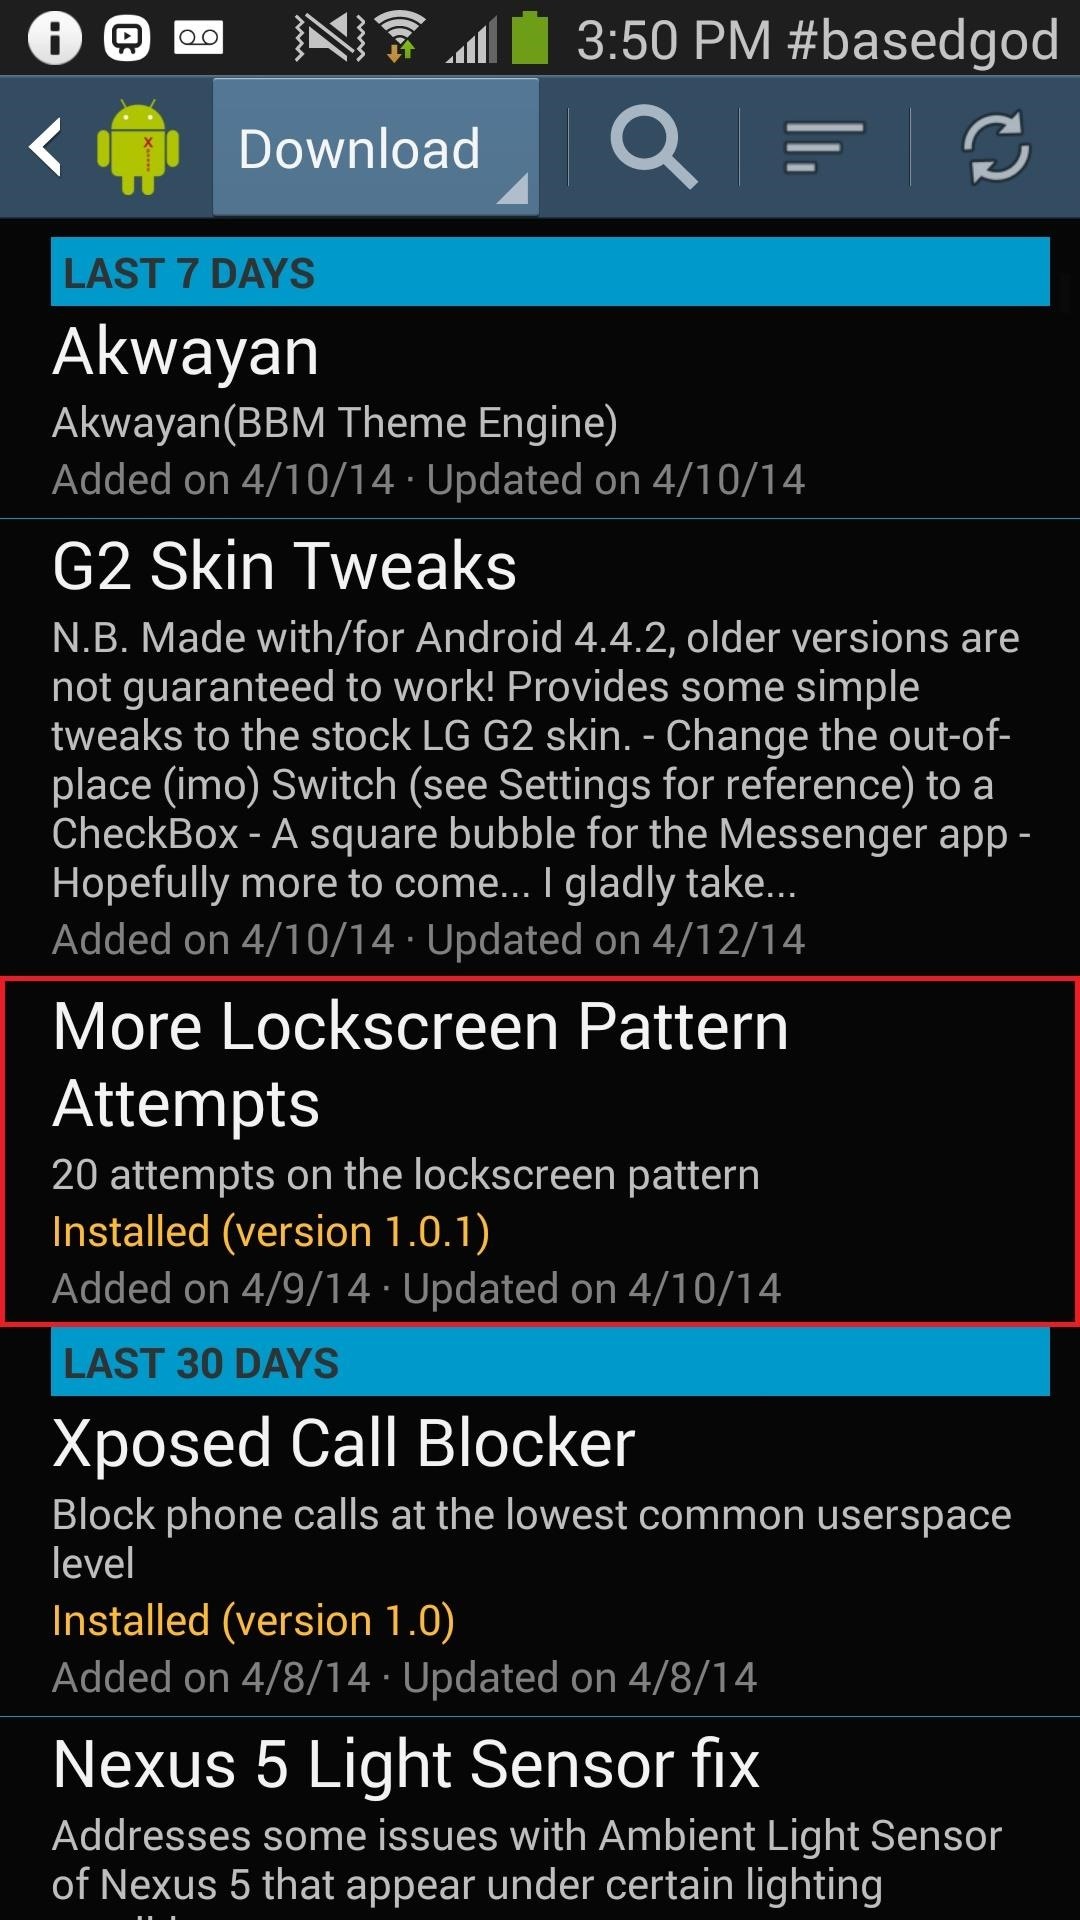 How to Get More Lock Screen Pattern Attempts Without Waiting on Your Samsung Galaxy Note 3